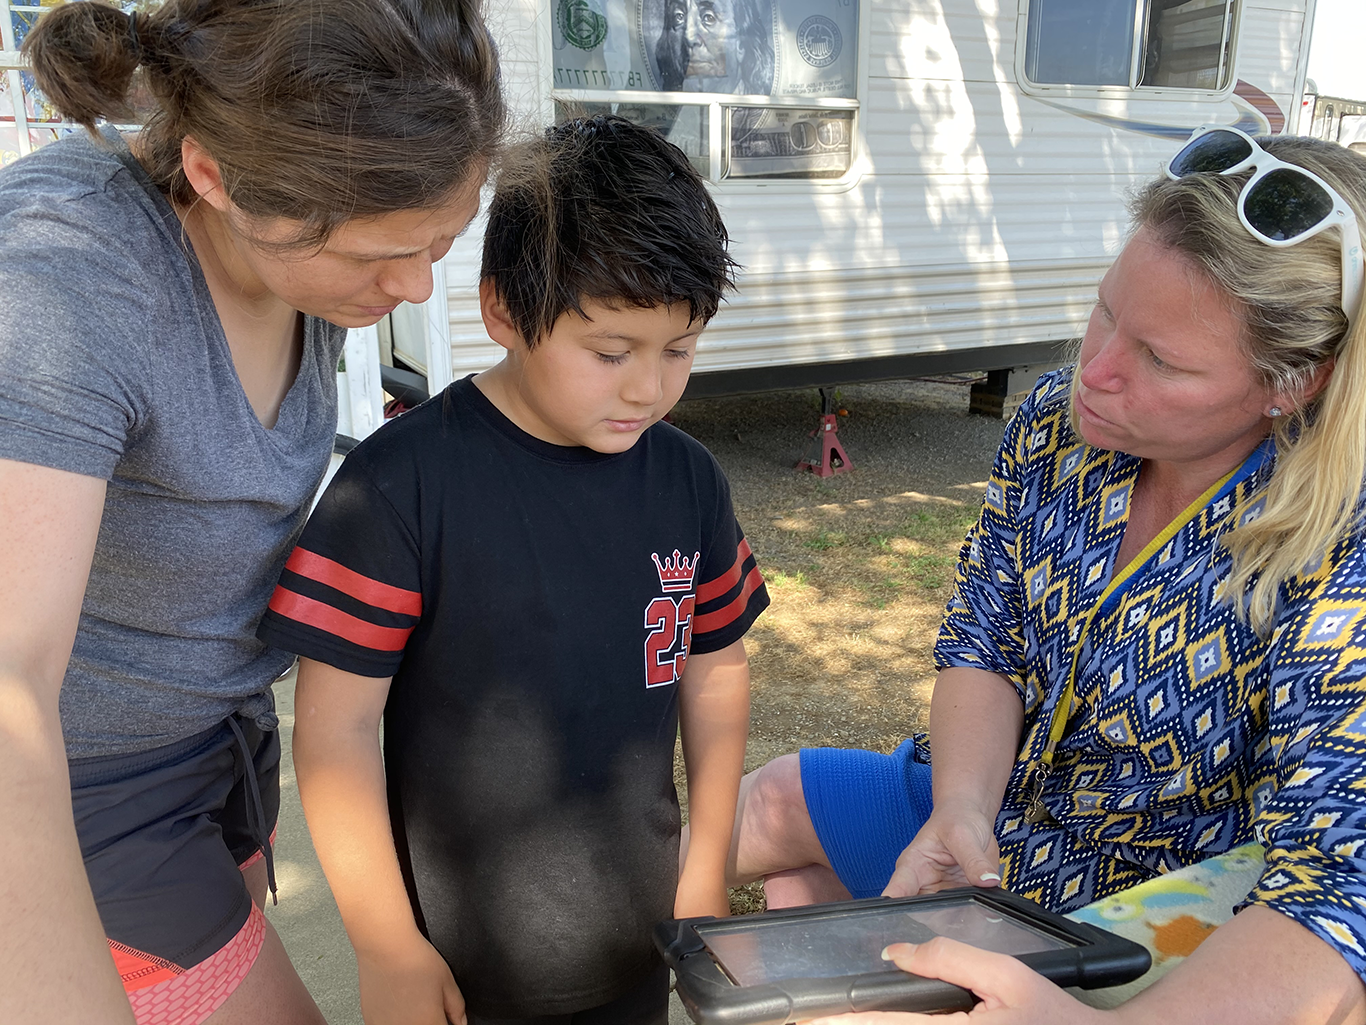 A mother and her third-grader son standing and looking at a Chromebook held by seated teacher, outside their mobile home.  